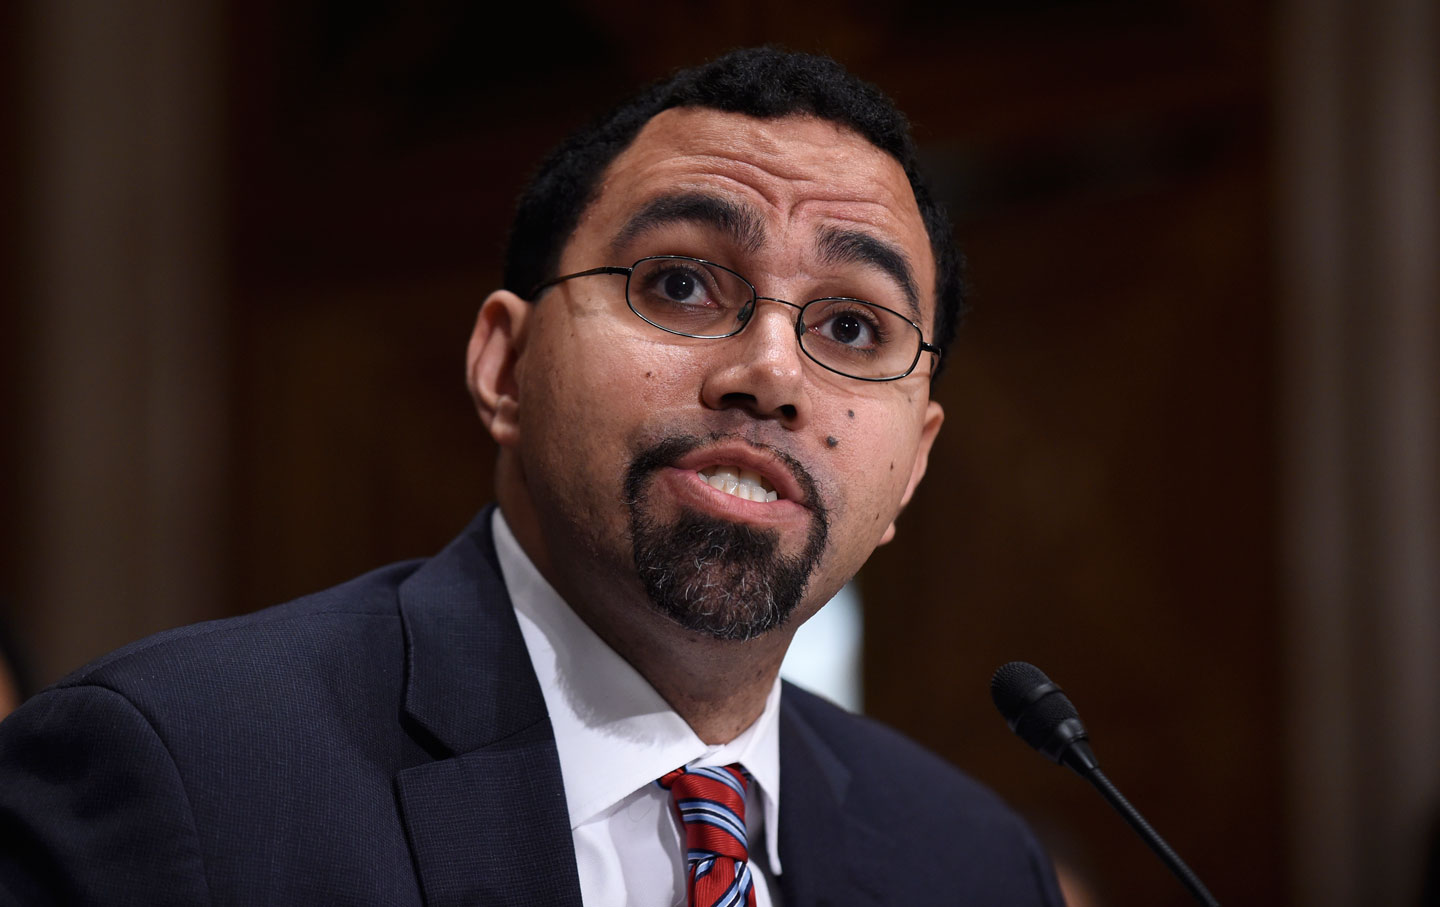 Why John King Should Be Rejected as Secretary of Education